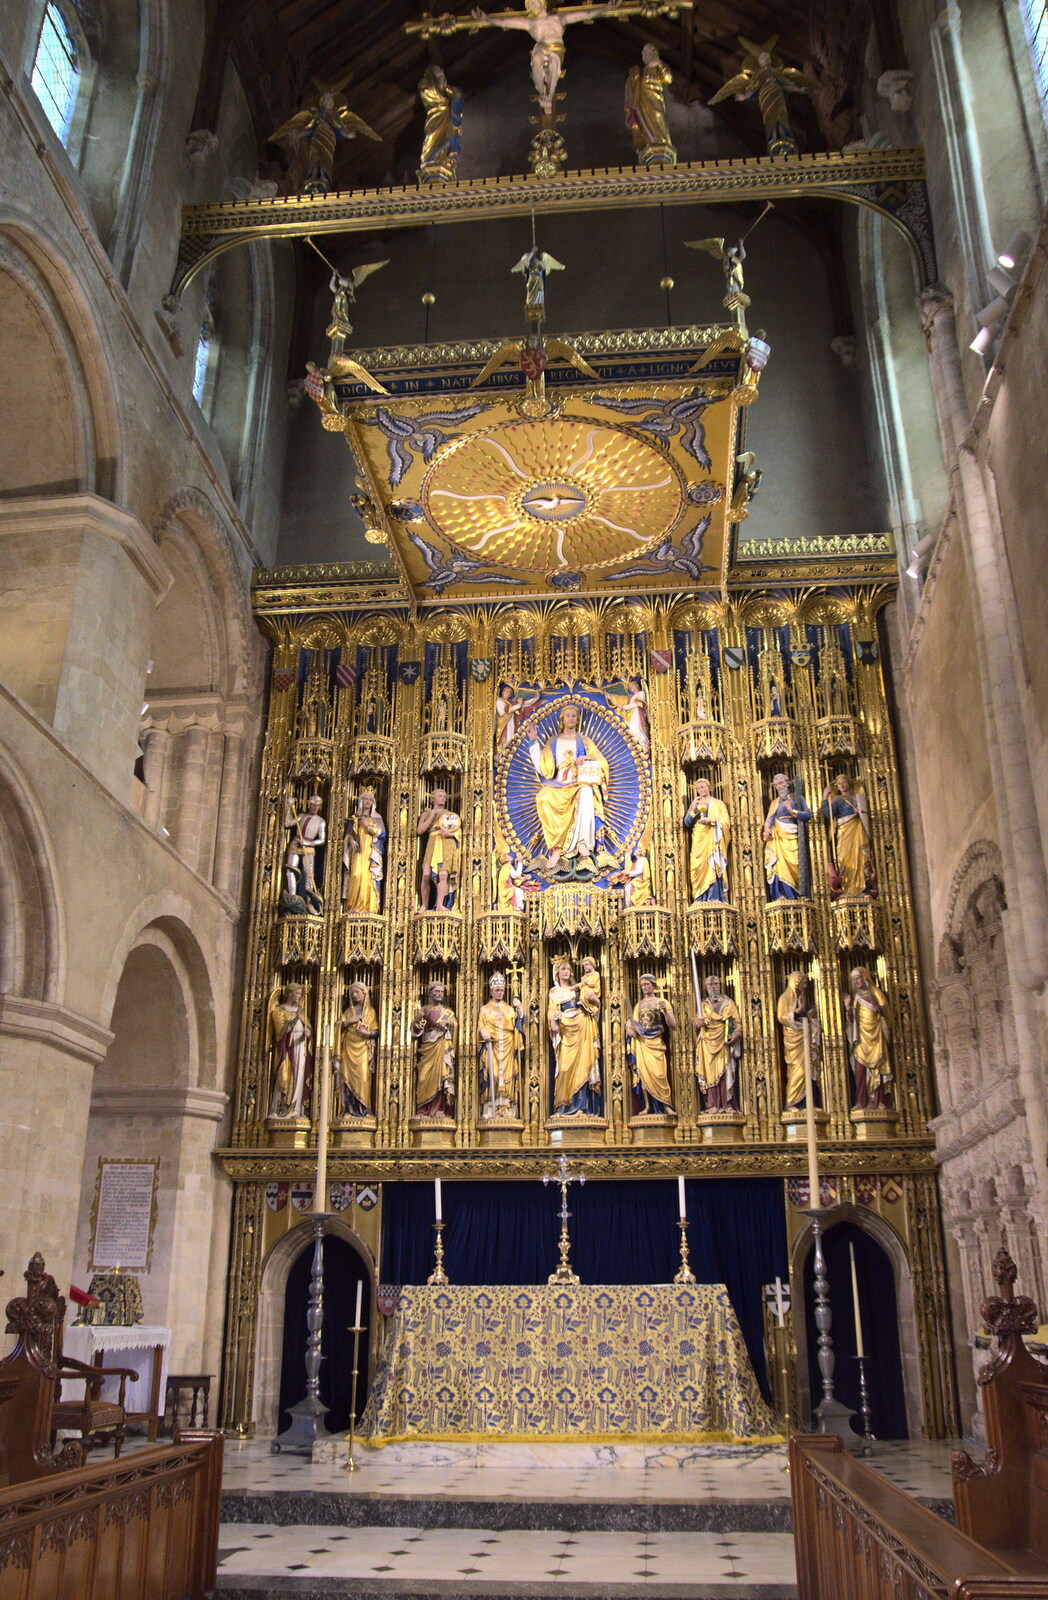 The amazing reredos, or altar screen from A Postcard from Wymondham, Norfolk - 26th January 2023